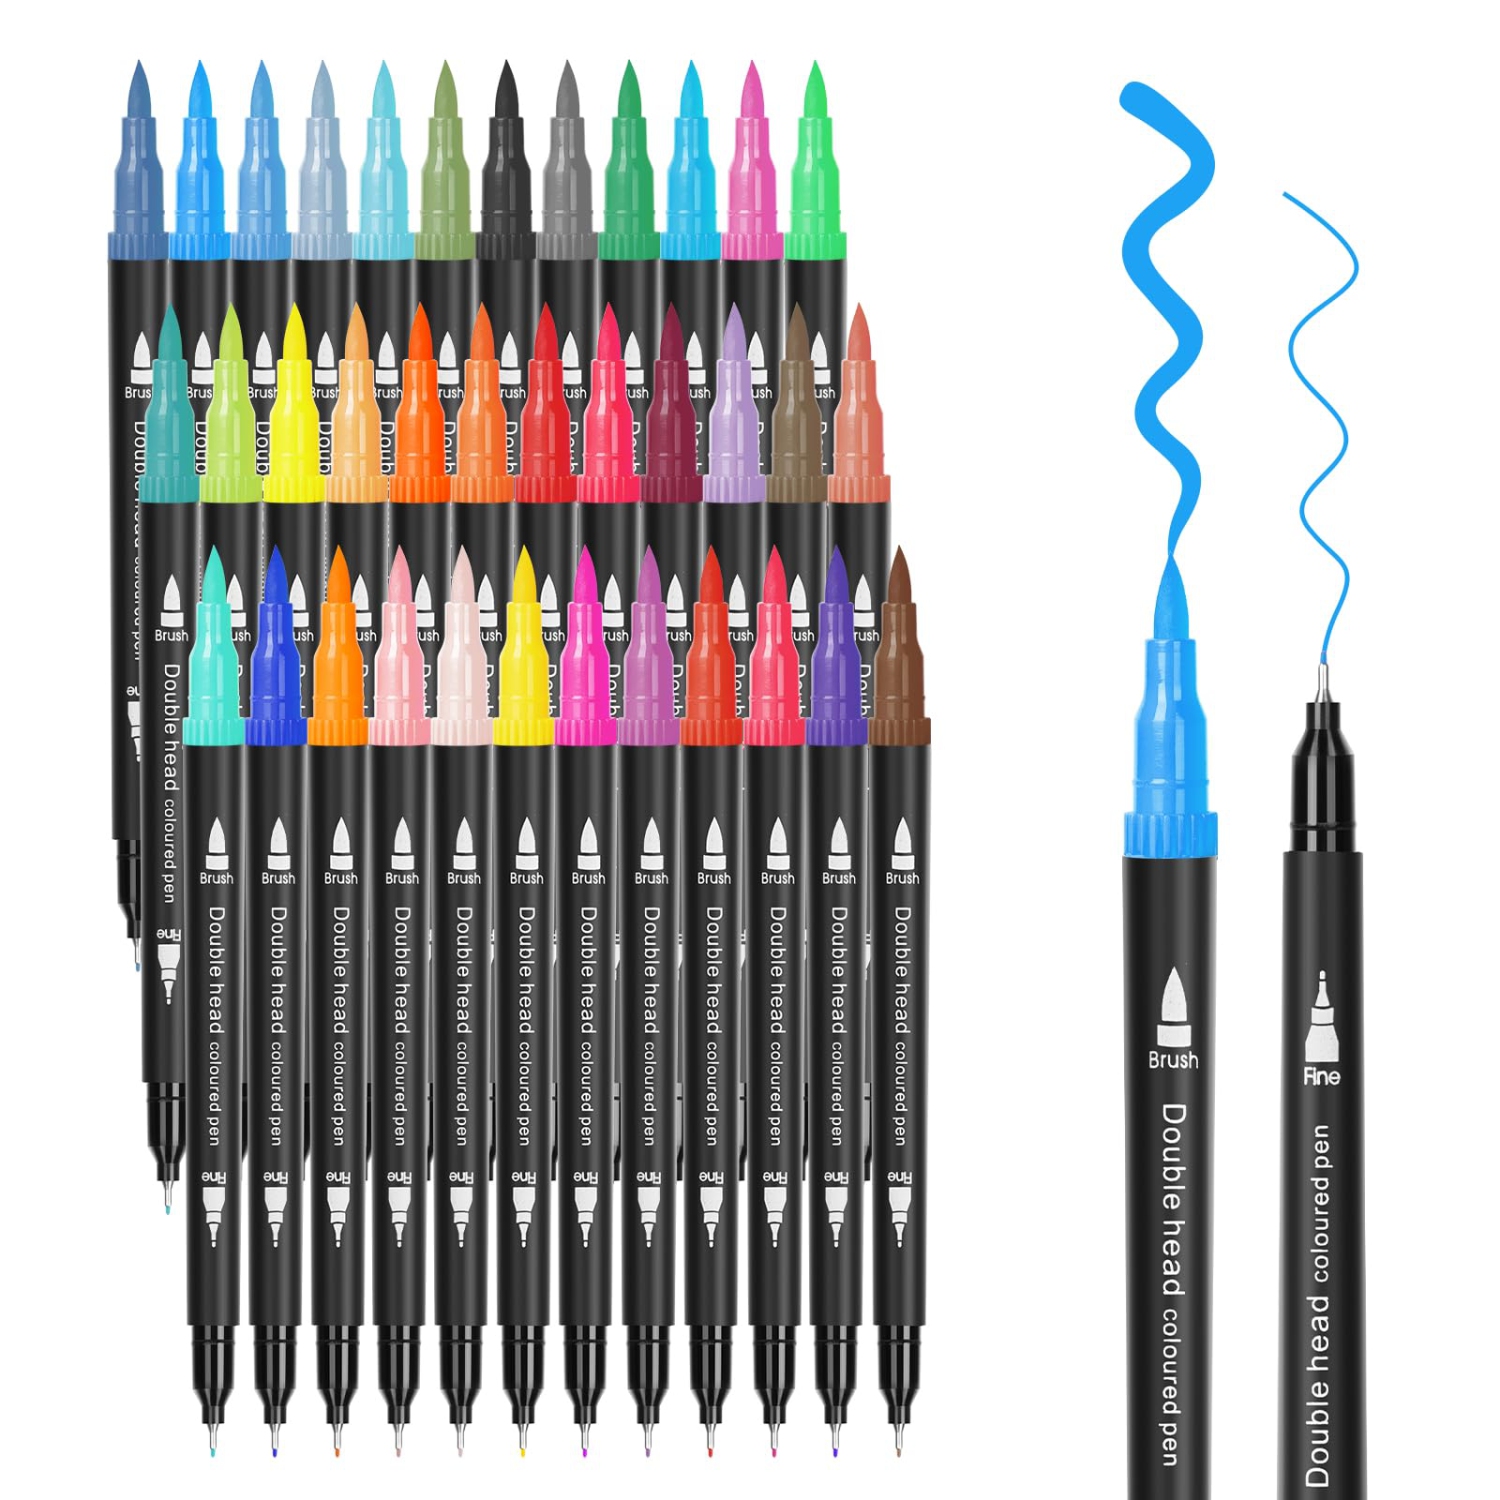 ColorBlend Dual Brush Marker Pens - 36 Vibrant Colors, Fine Point and Brush Tip - Perfect for Adult Coloring, Journaling, and Art Projects - DHMP36